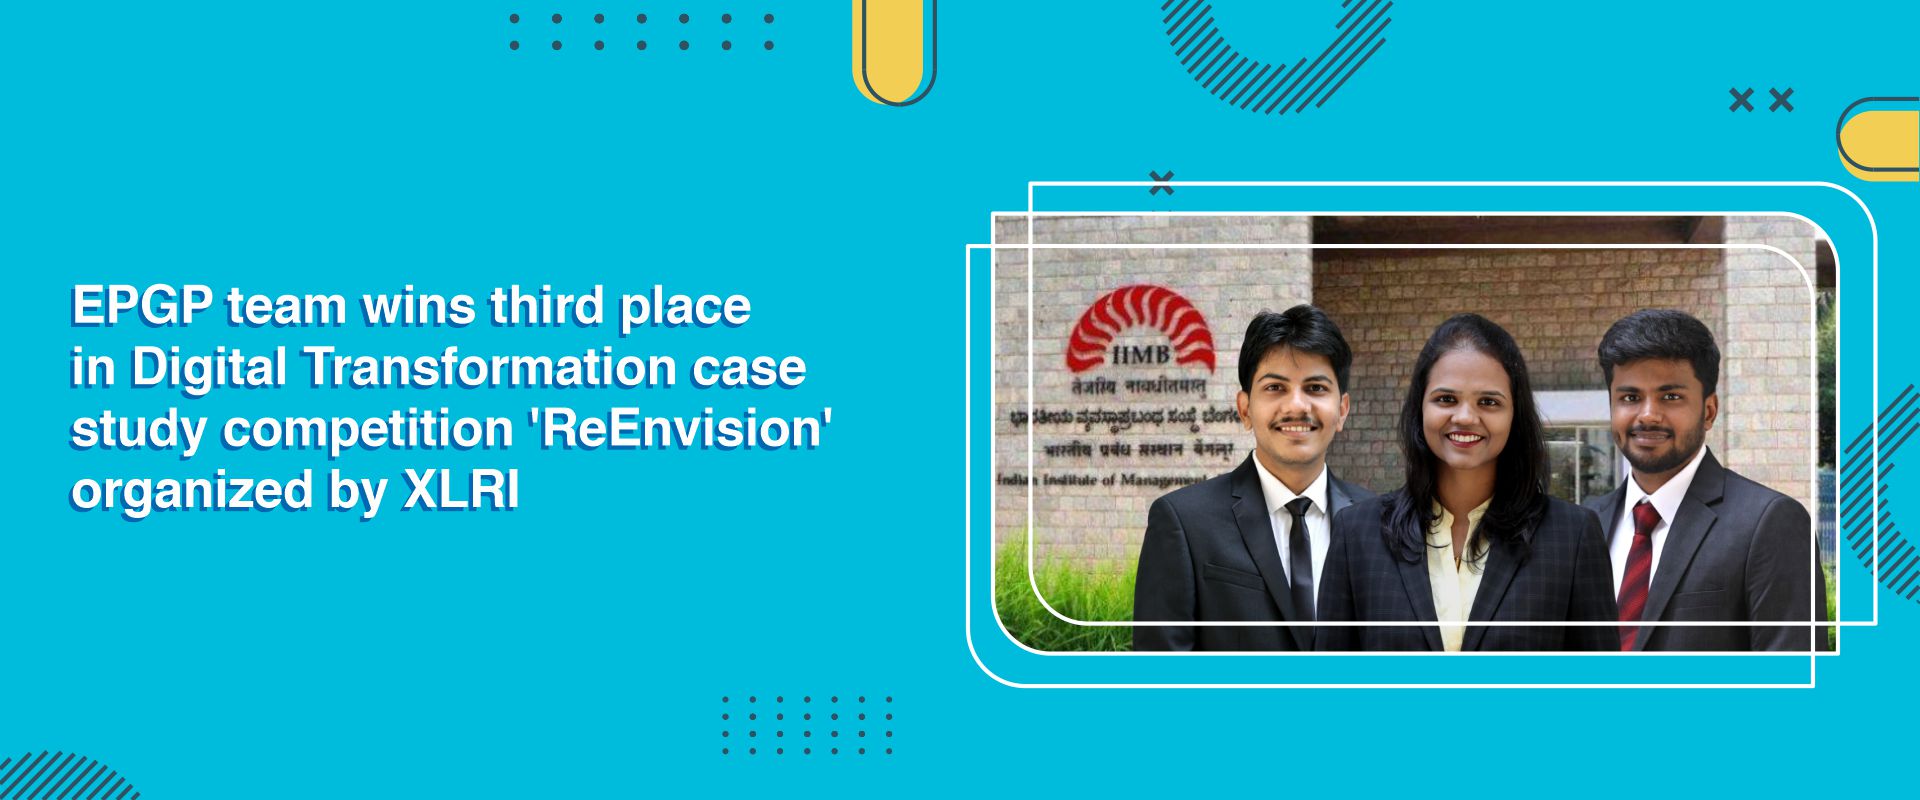 EPGP team wins third place in Digital Transformation case study competition ‘ReEnvision’ organized by XLRI 